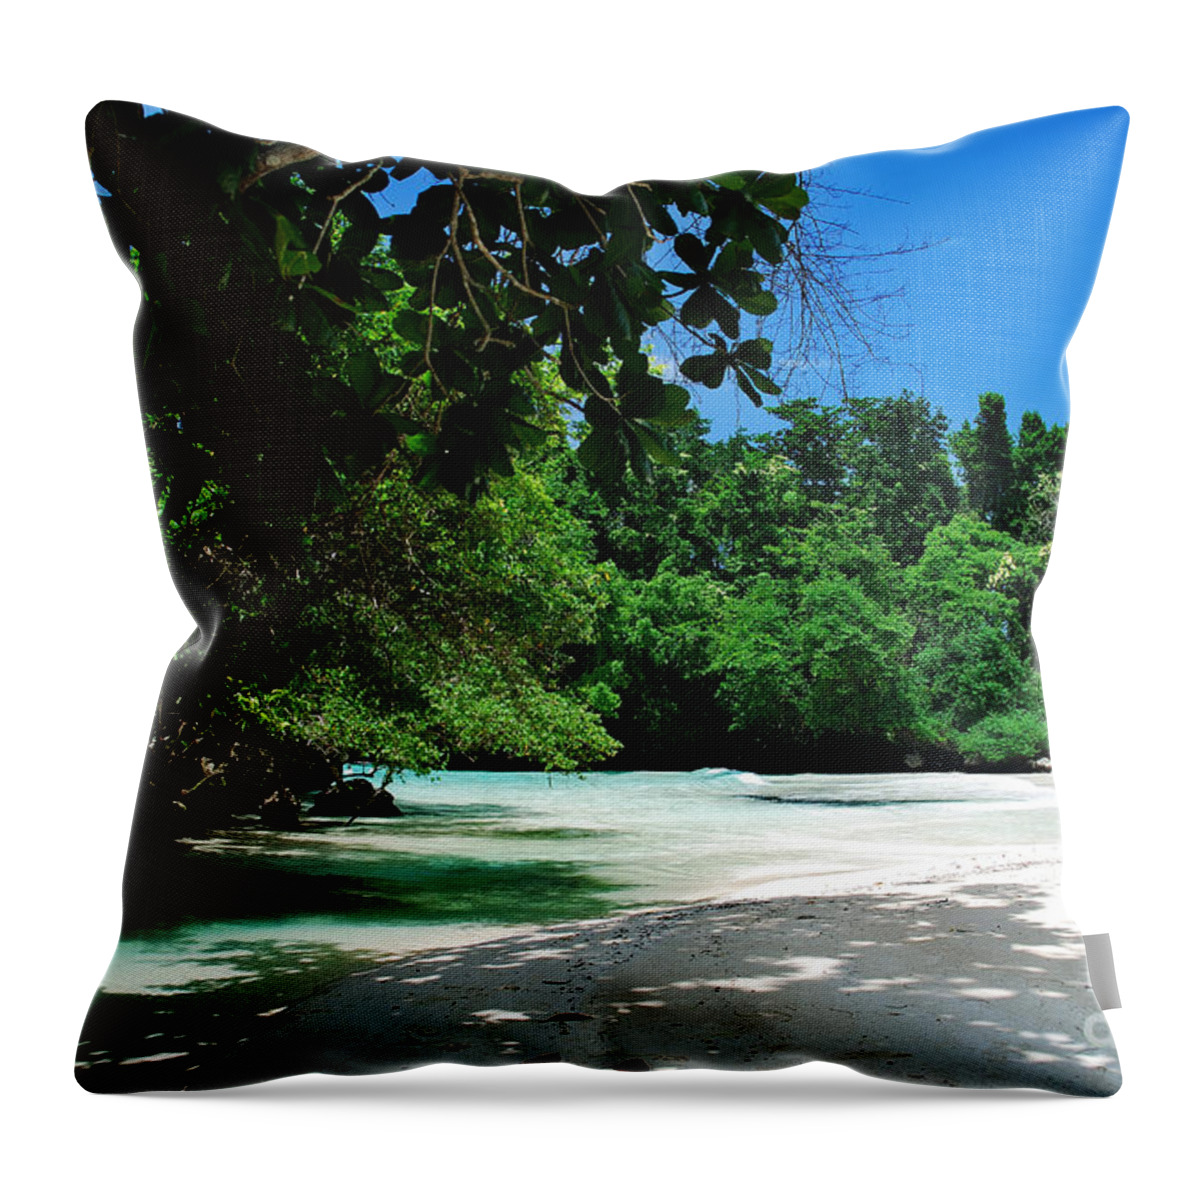 Beach Throw Pillow featuring the photograph A Piece Of Paradice by Hannes Cmarits